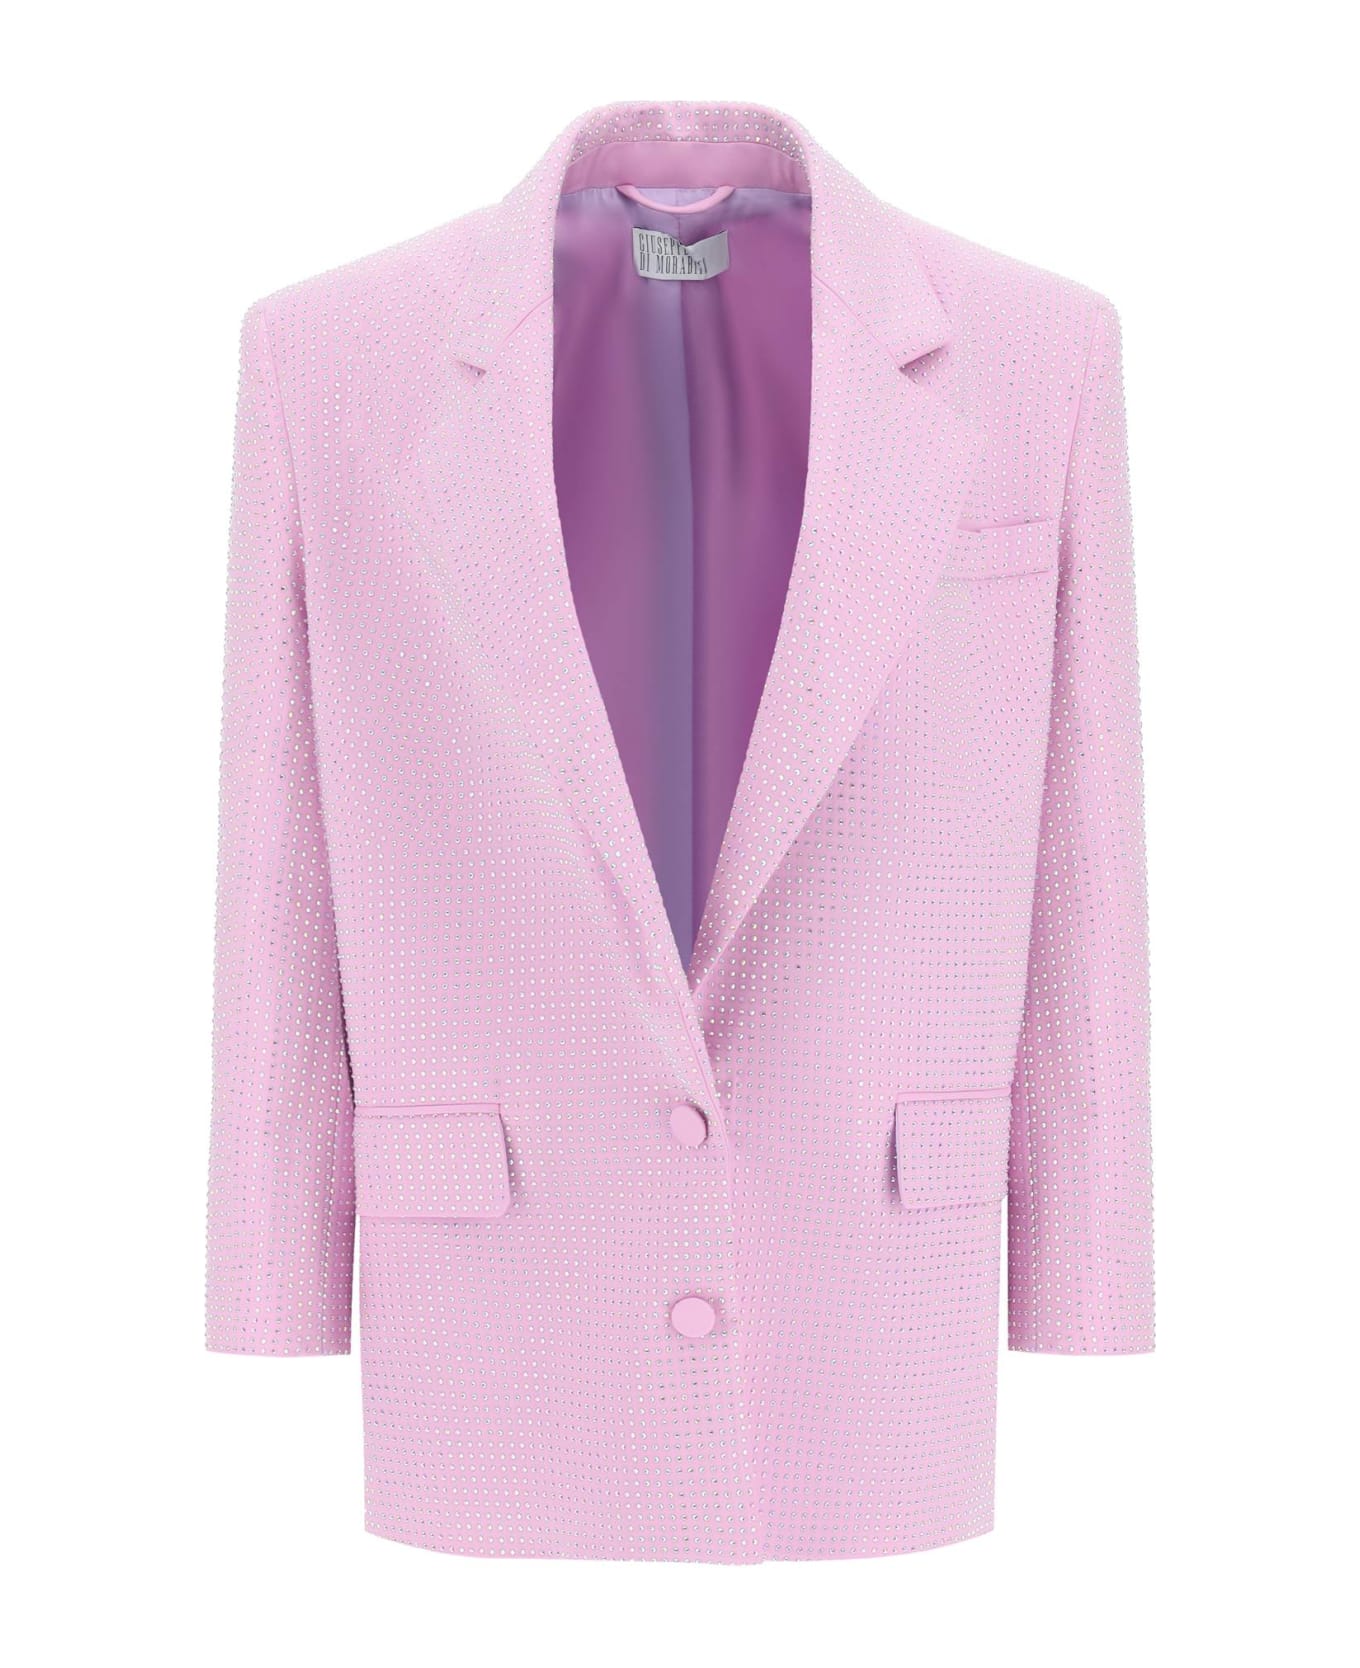 Giuseppe di Morabito Stretch Cotton Jacket With Crystals - LILAC PINK (Pink)